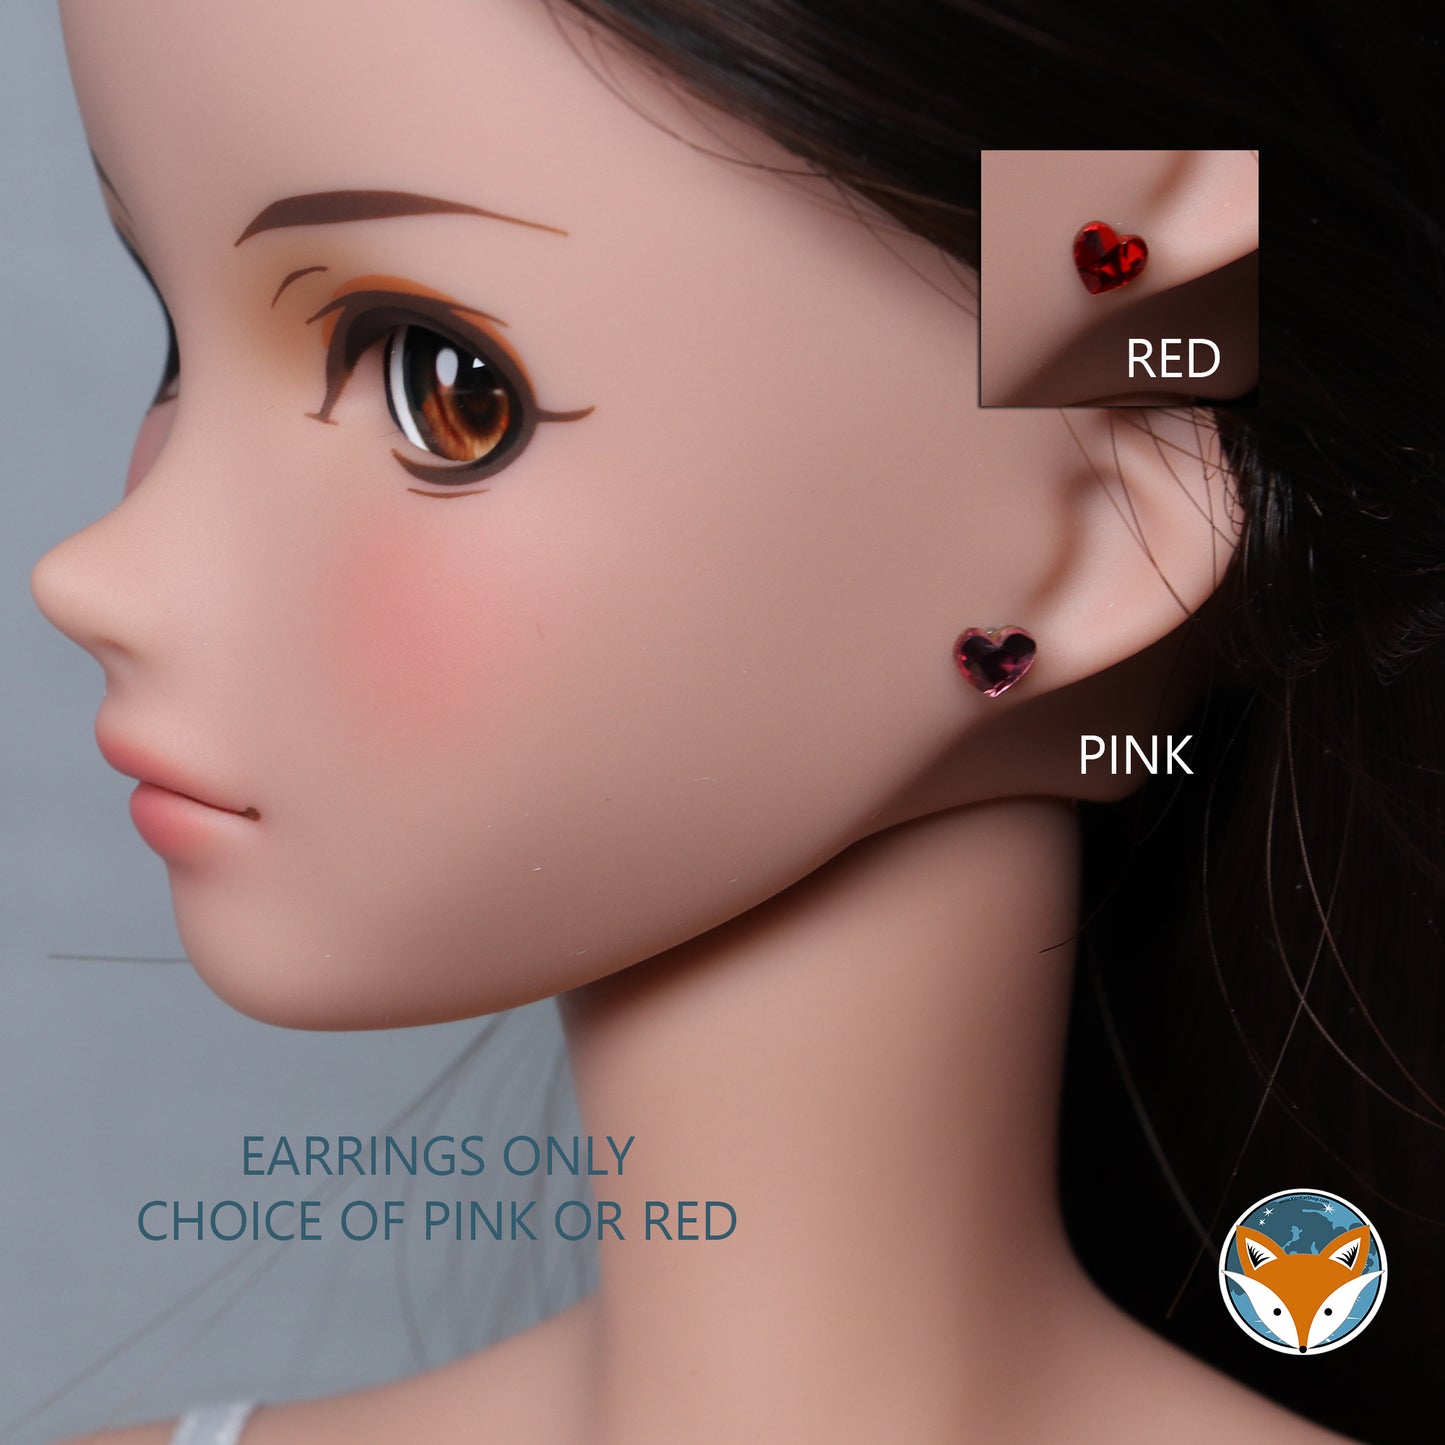 No-Hole Earrings for Dolls - mini heart crystal studs - red or pink